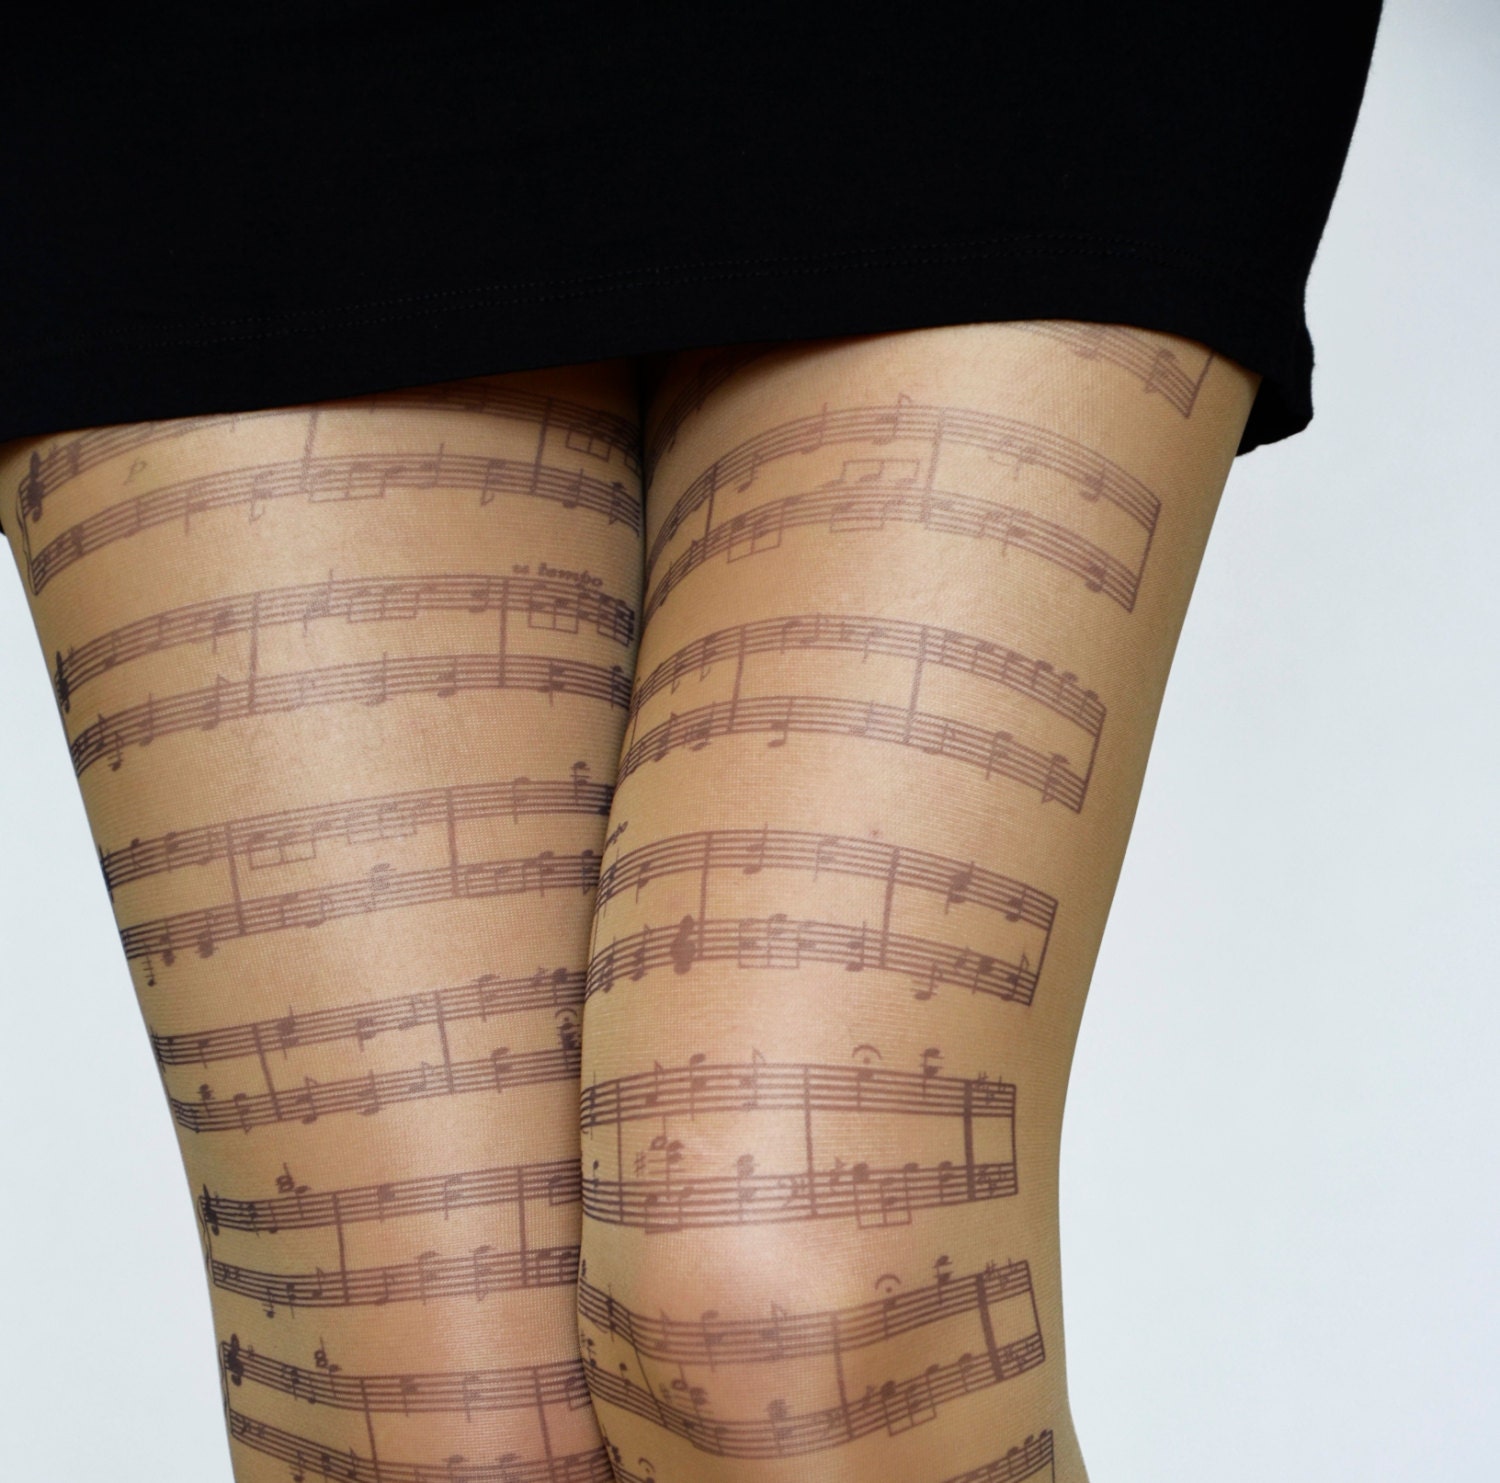 Musical Notes Tights , Music Clef Print Choir, Orchestra Leggings , Opaque  Women's Pantyhose, Printed Tights 